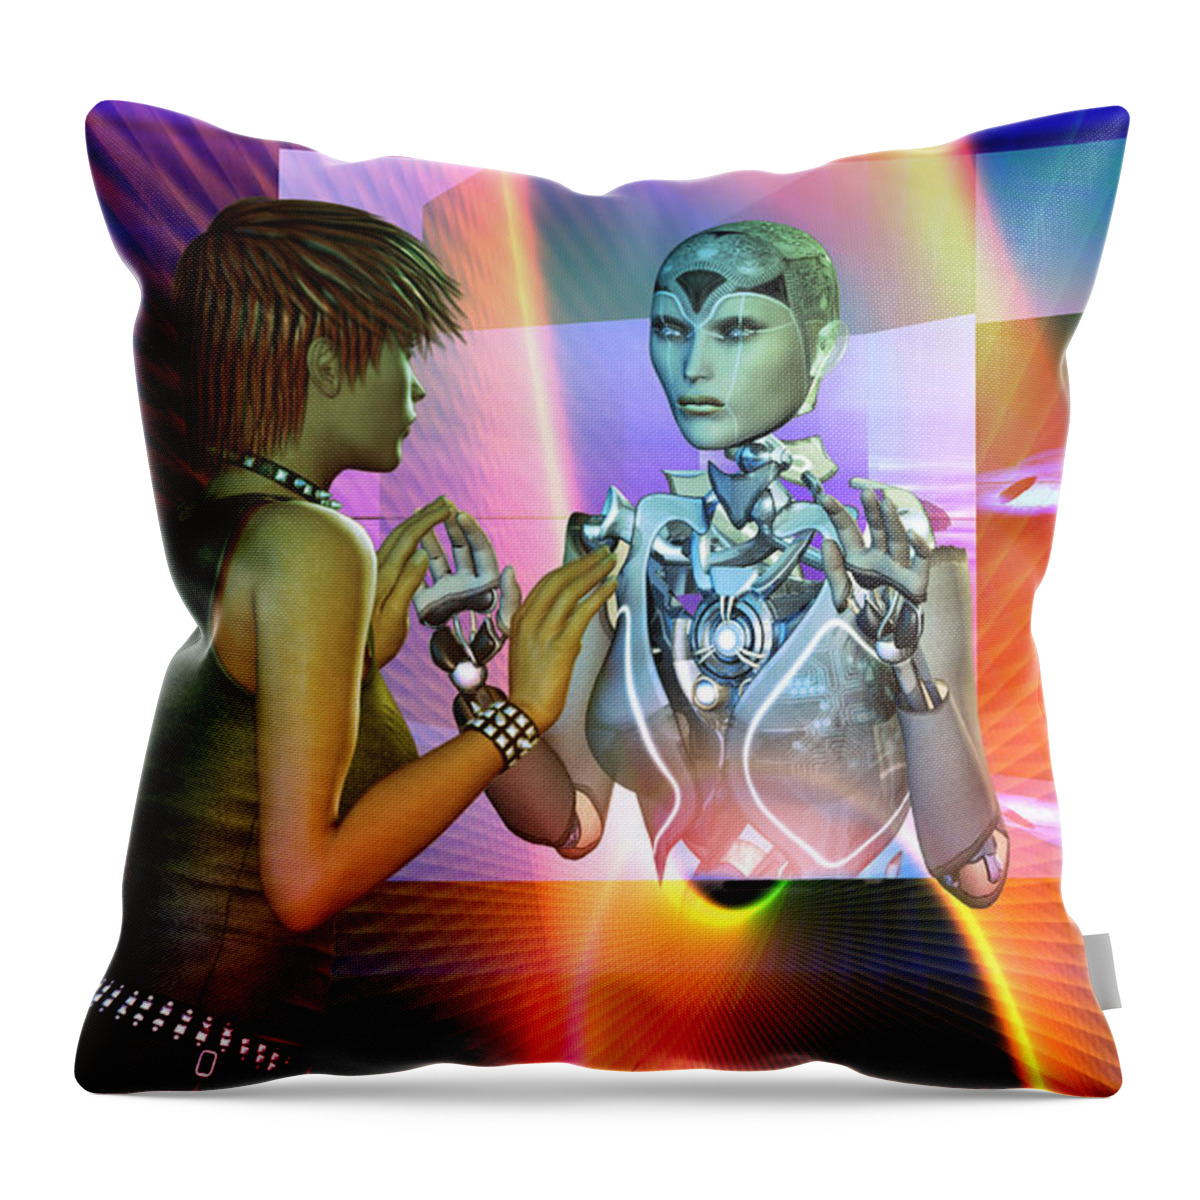  Throw Pillow featuring the digital art Futuristic Reality by Shadowlea Is